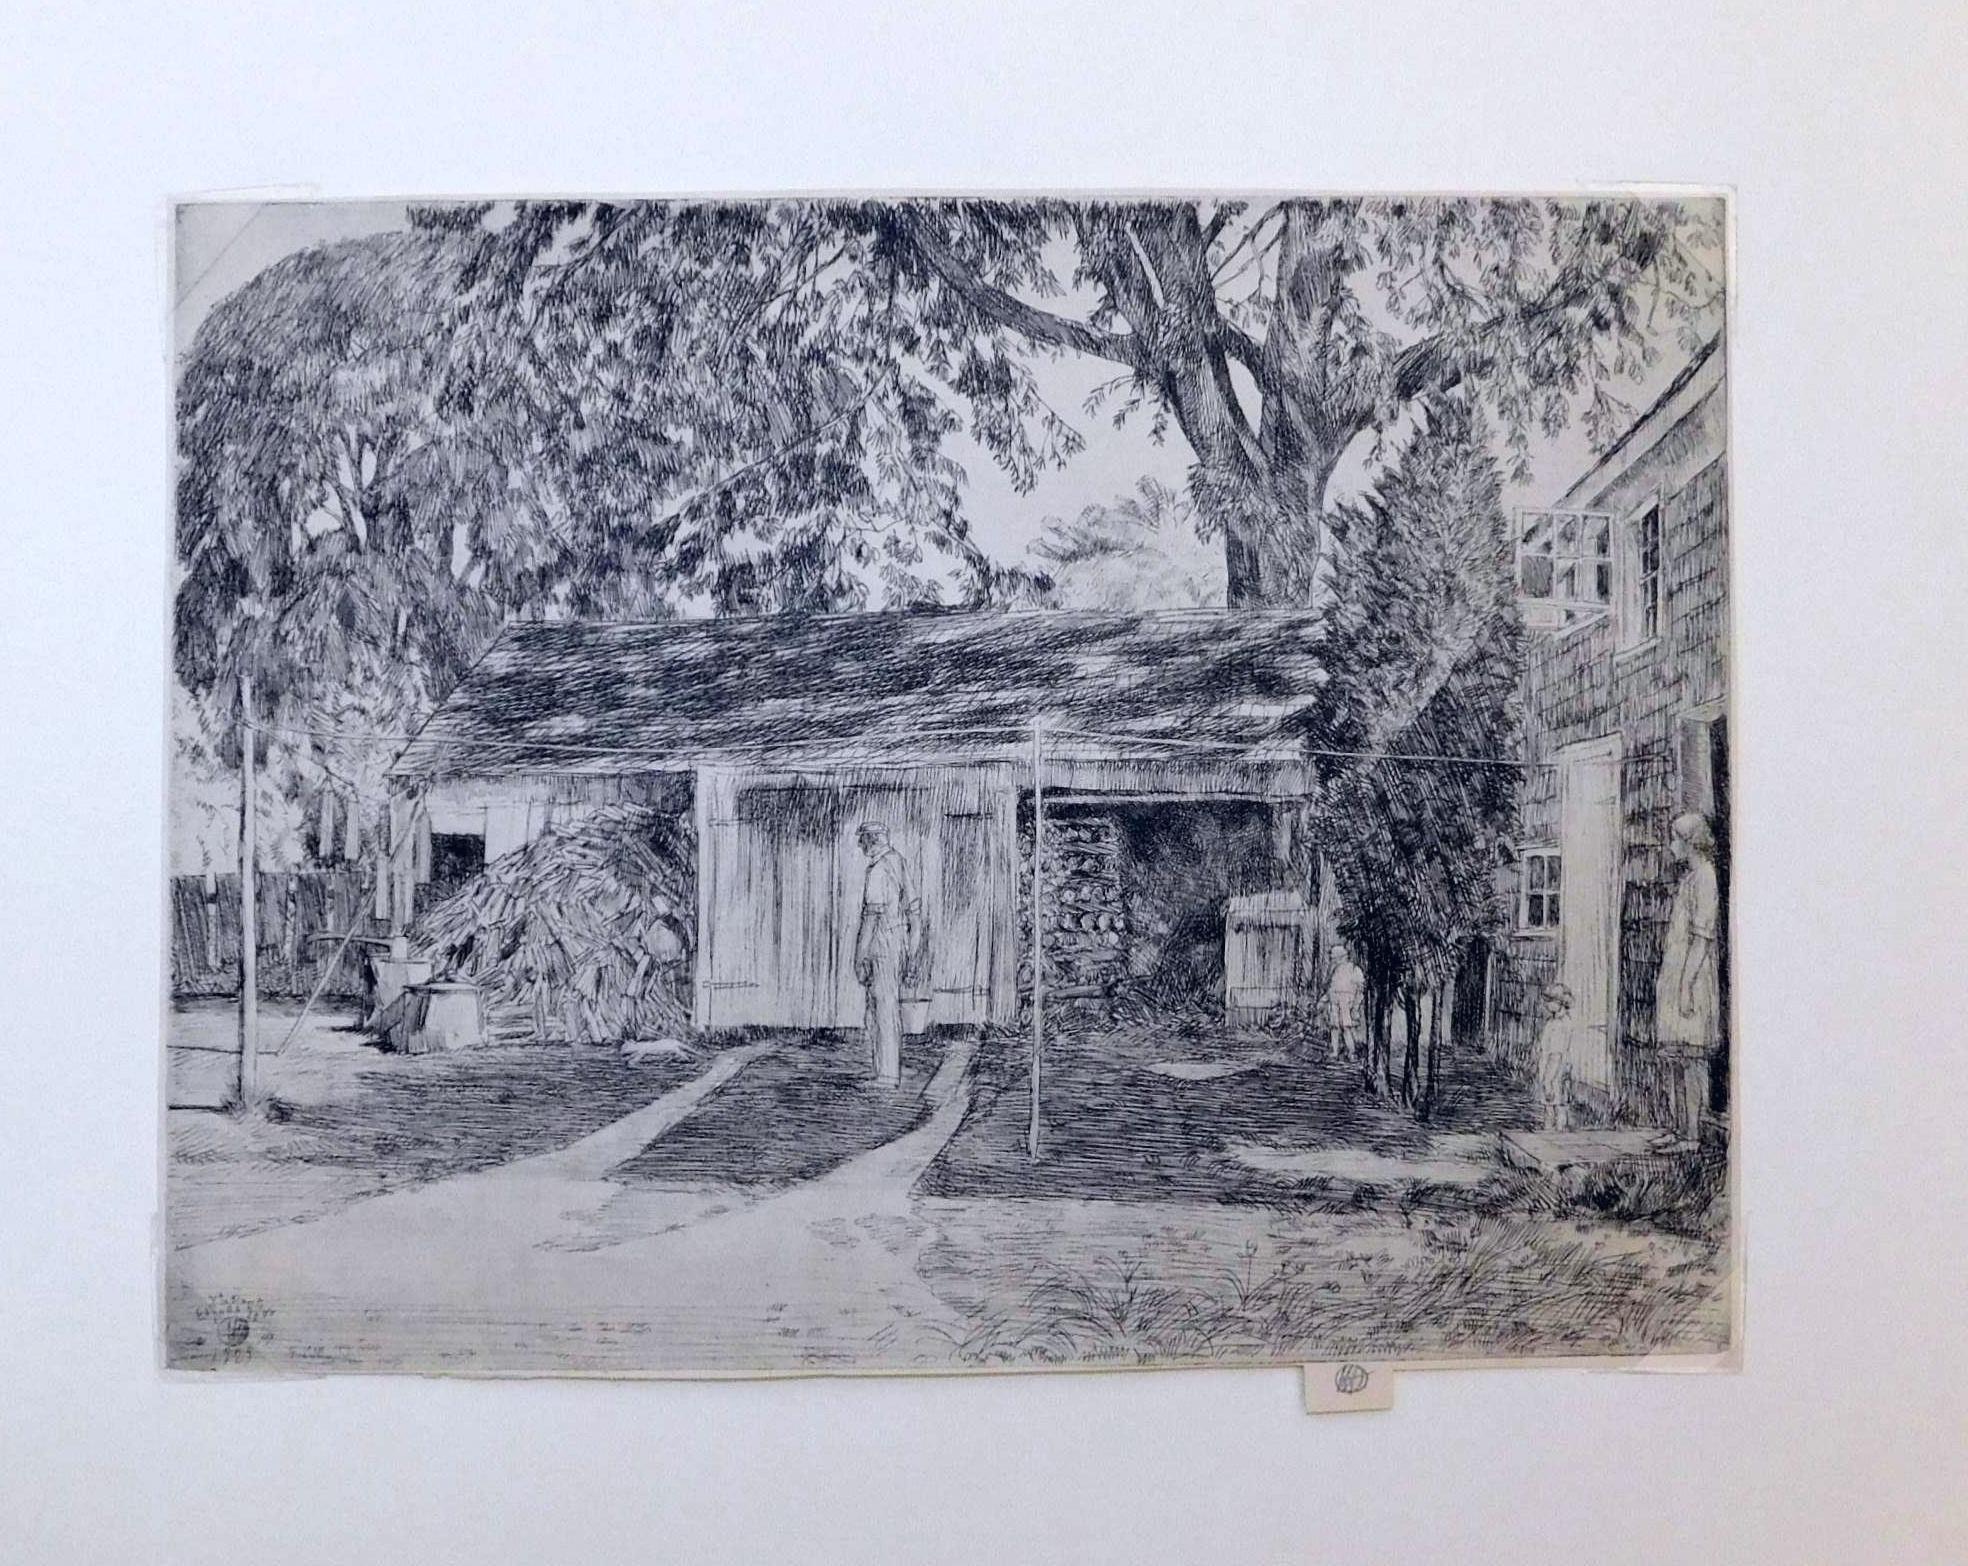 Original Etching by Childe Hassam (1859 - 1939). Created 1929.
Title: The Old Woodshed, East Hampton

Etching trimmed to plate and signed in pencil with his cypher on the lower tab. 
Also, his cypher and the date are seen in the plate lower